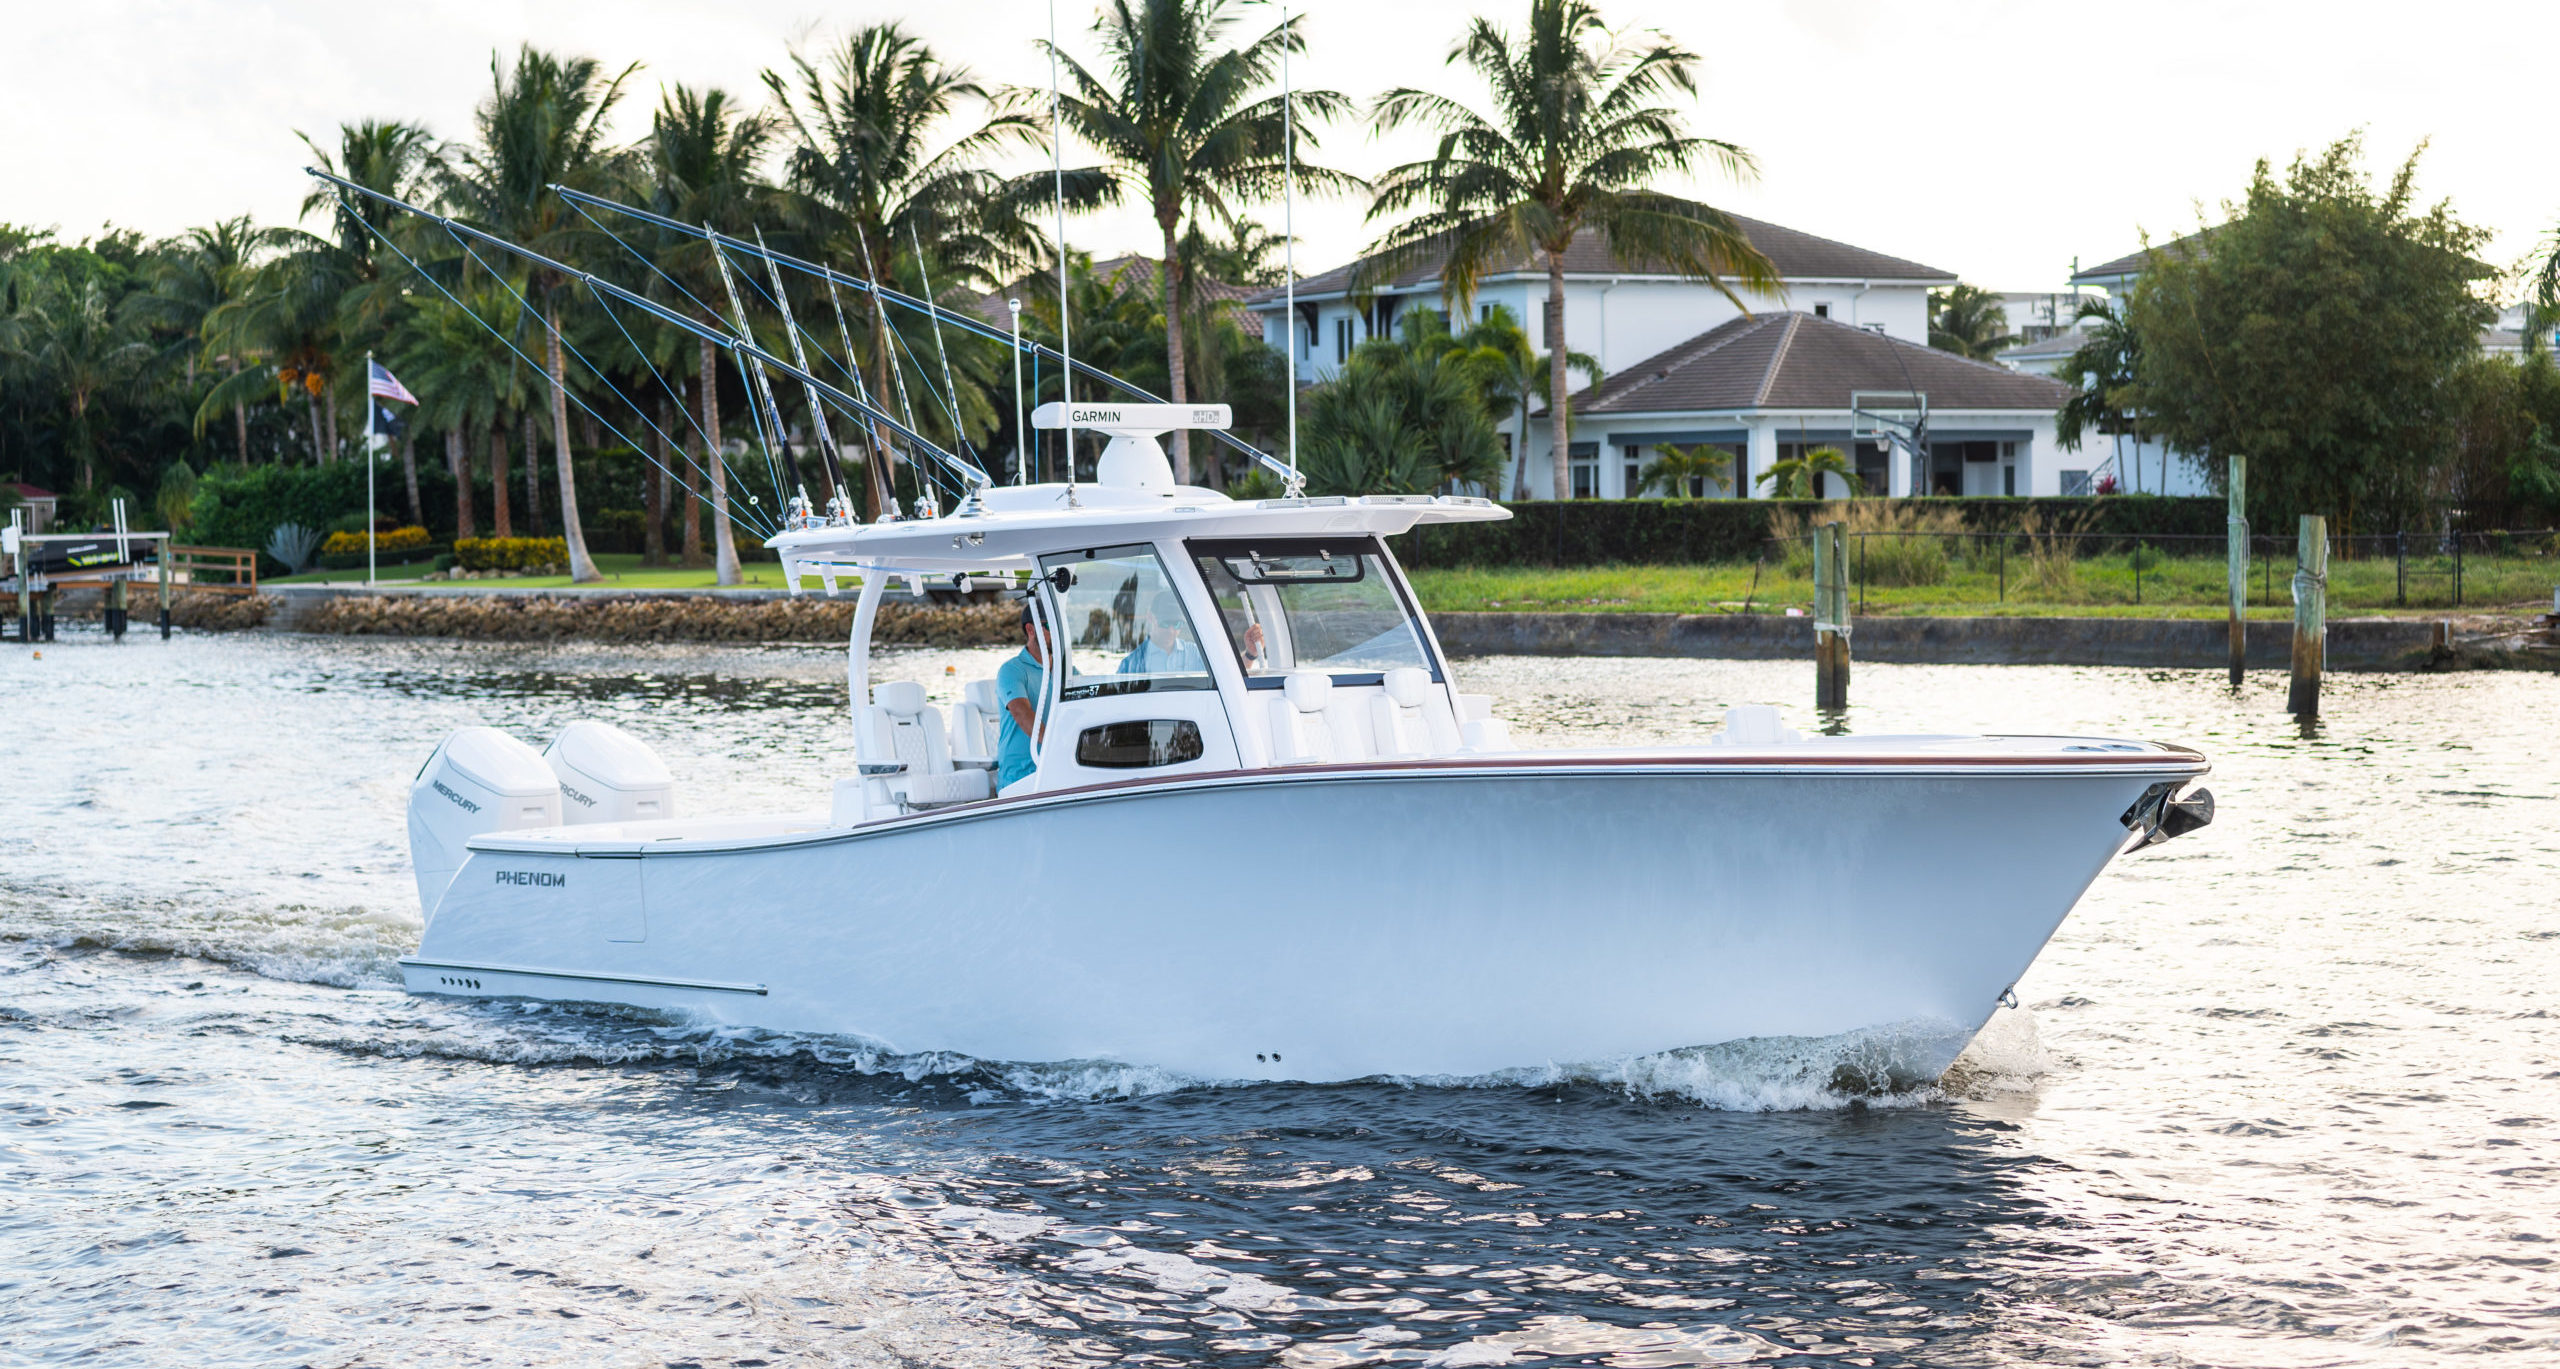 Phenom Yachts brings new brand to boating landscape